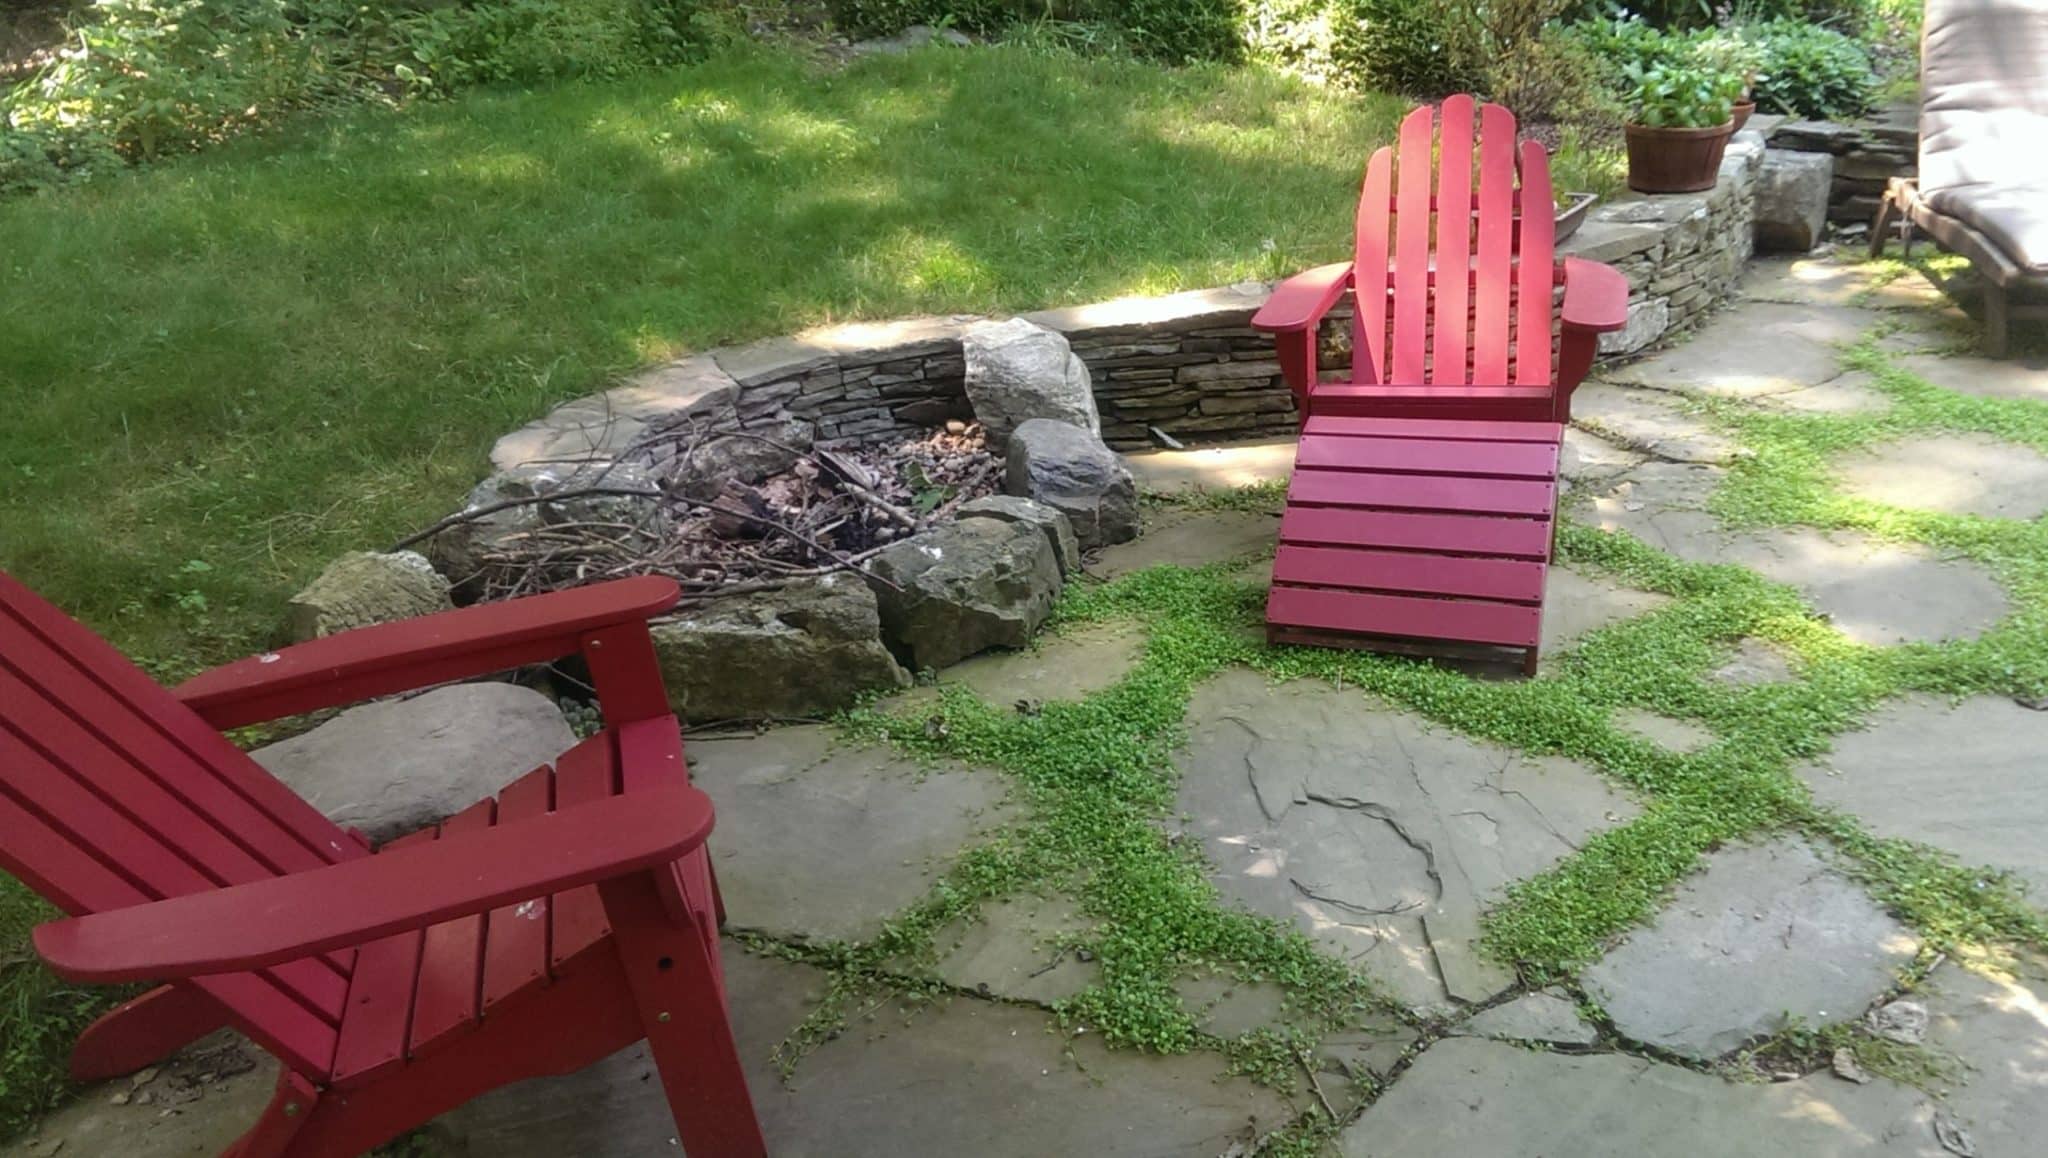 Loosely Laid Flagstone Patio with Stone Retaining Wall and Firepit